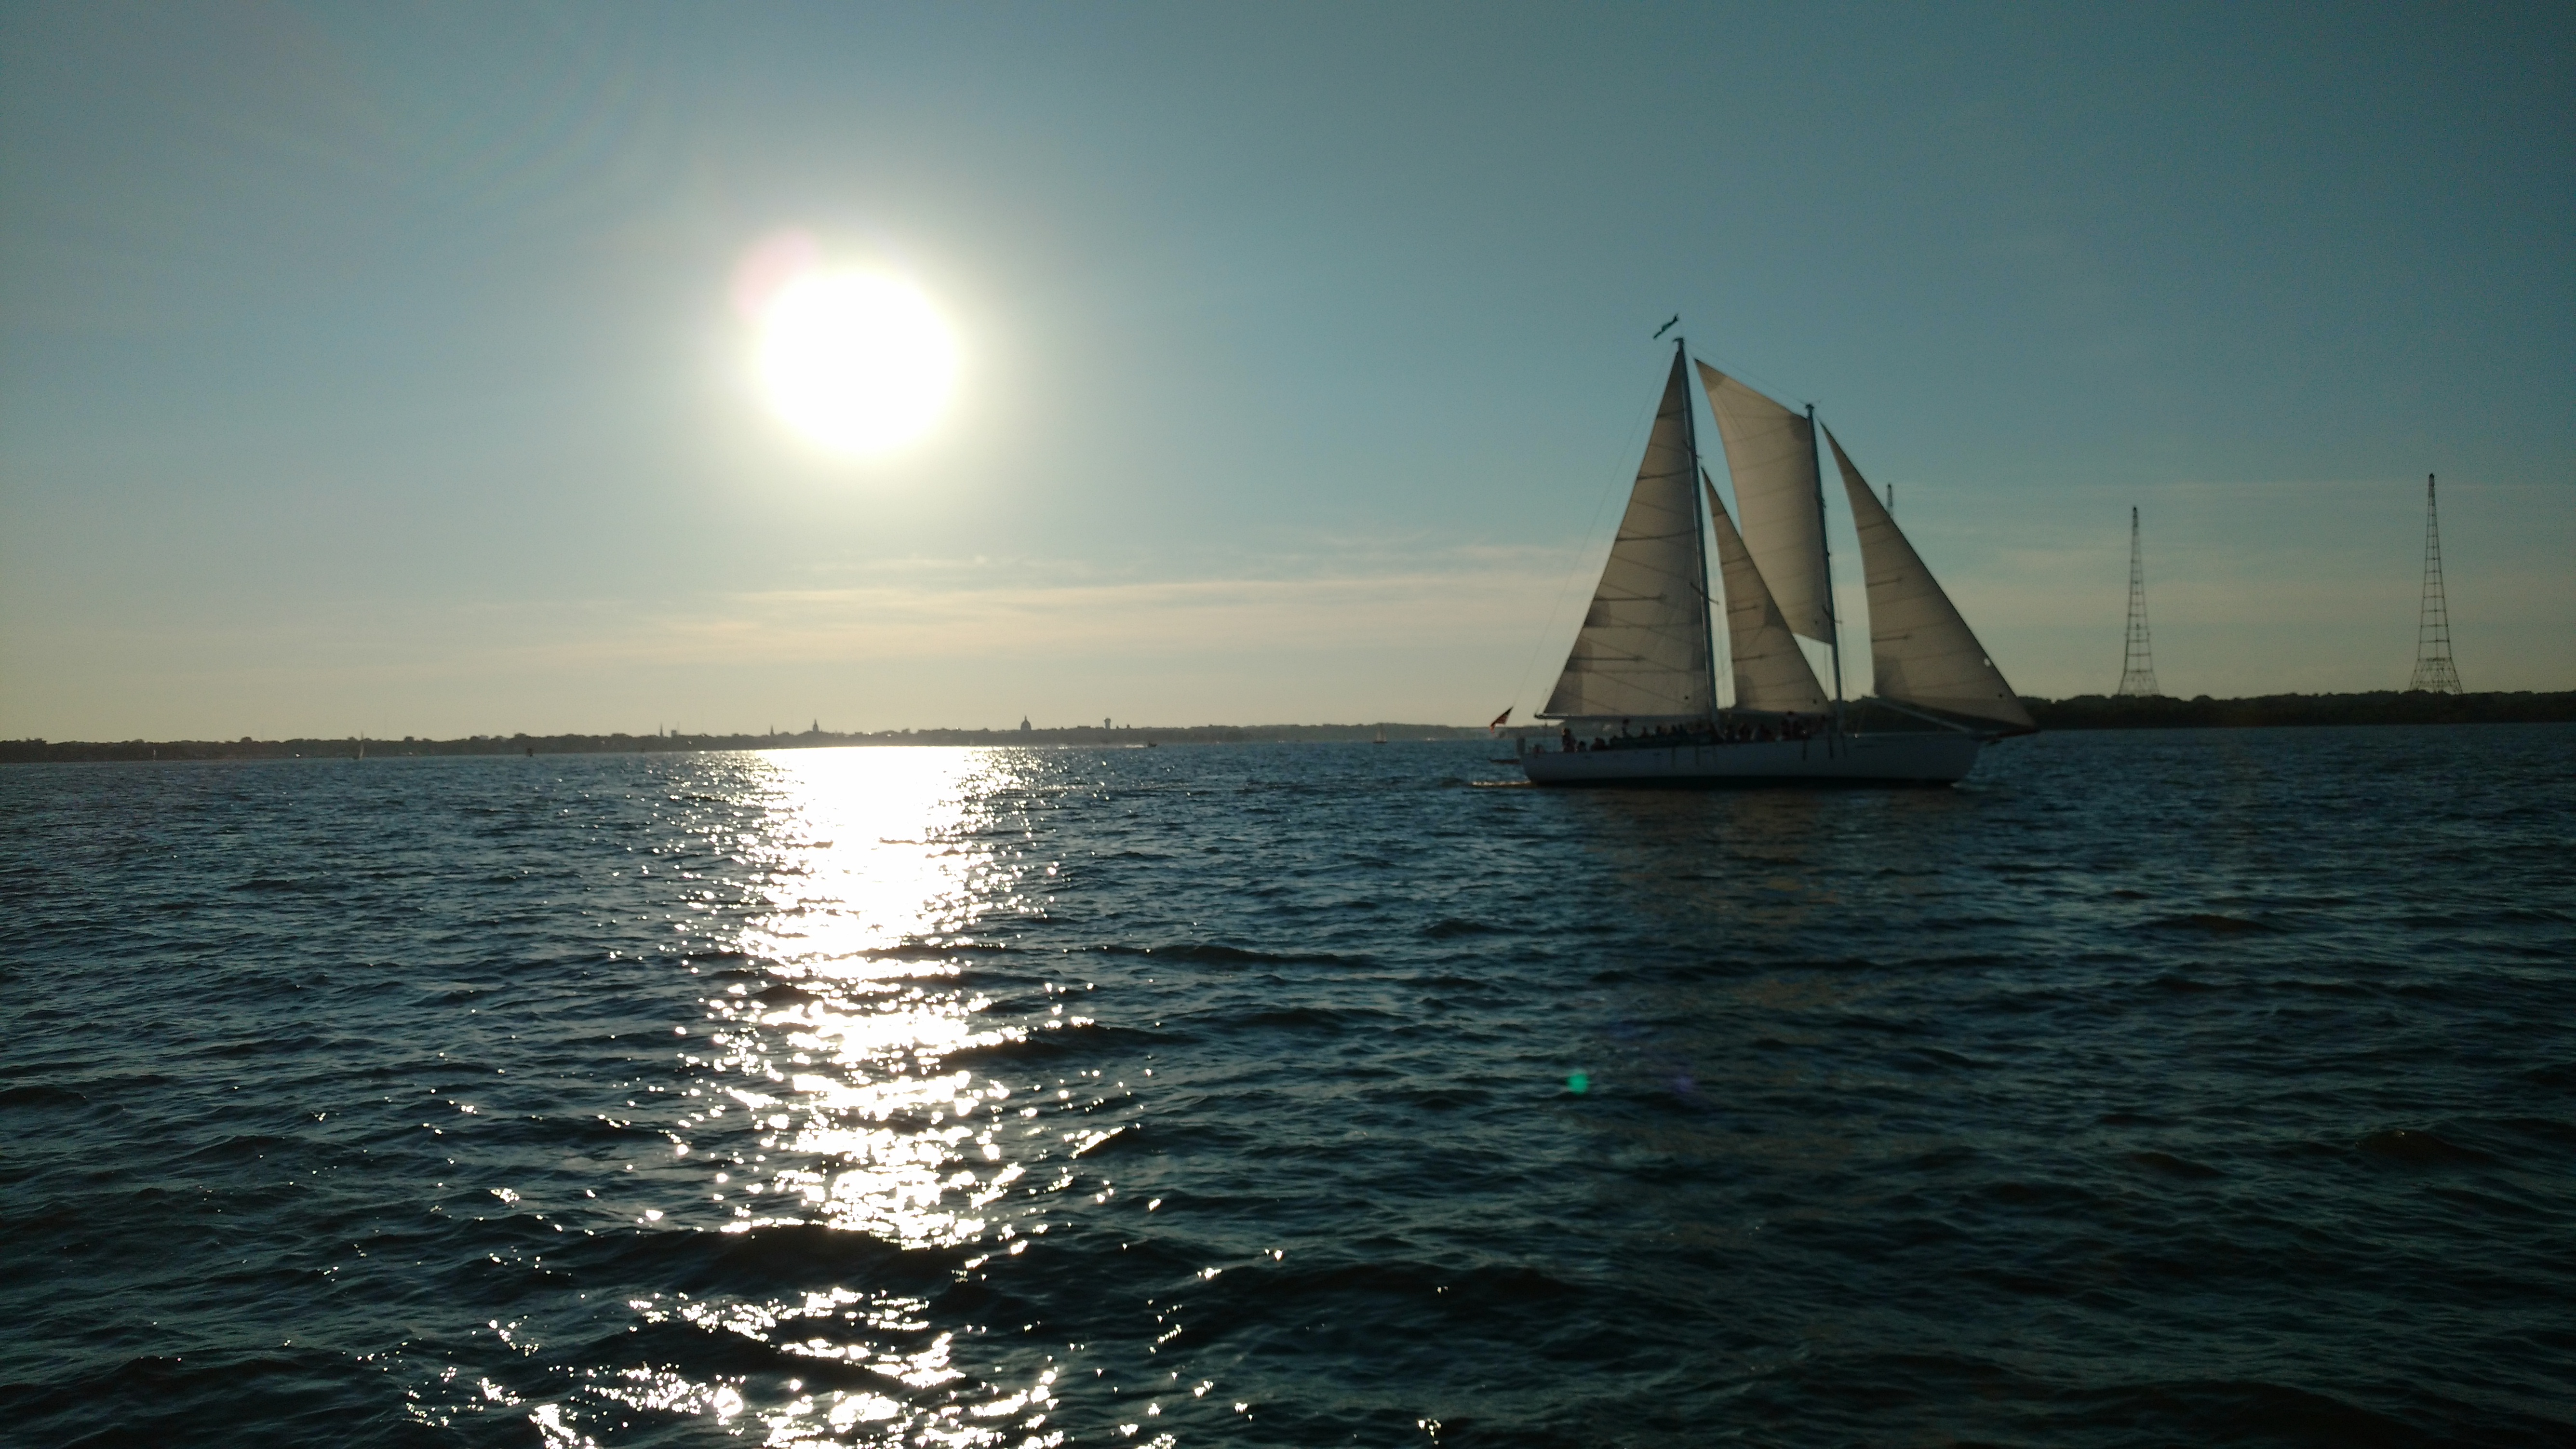 Schooner on an evening sail with bright sun reflecting on the water